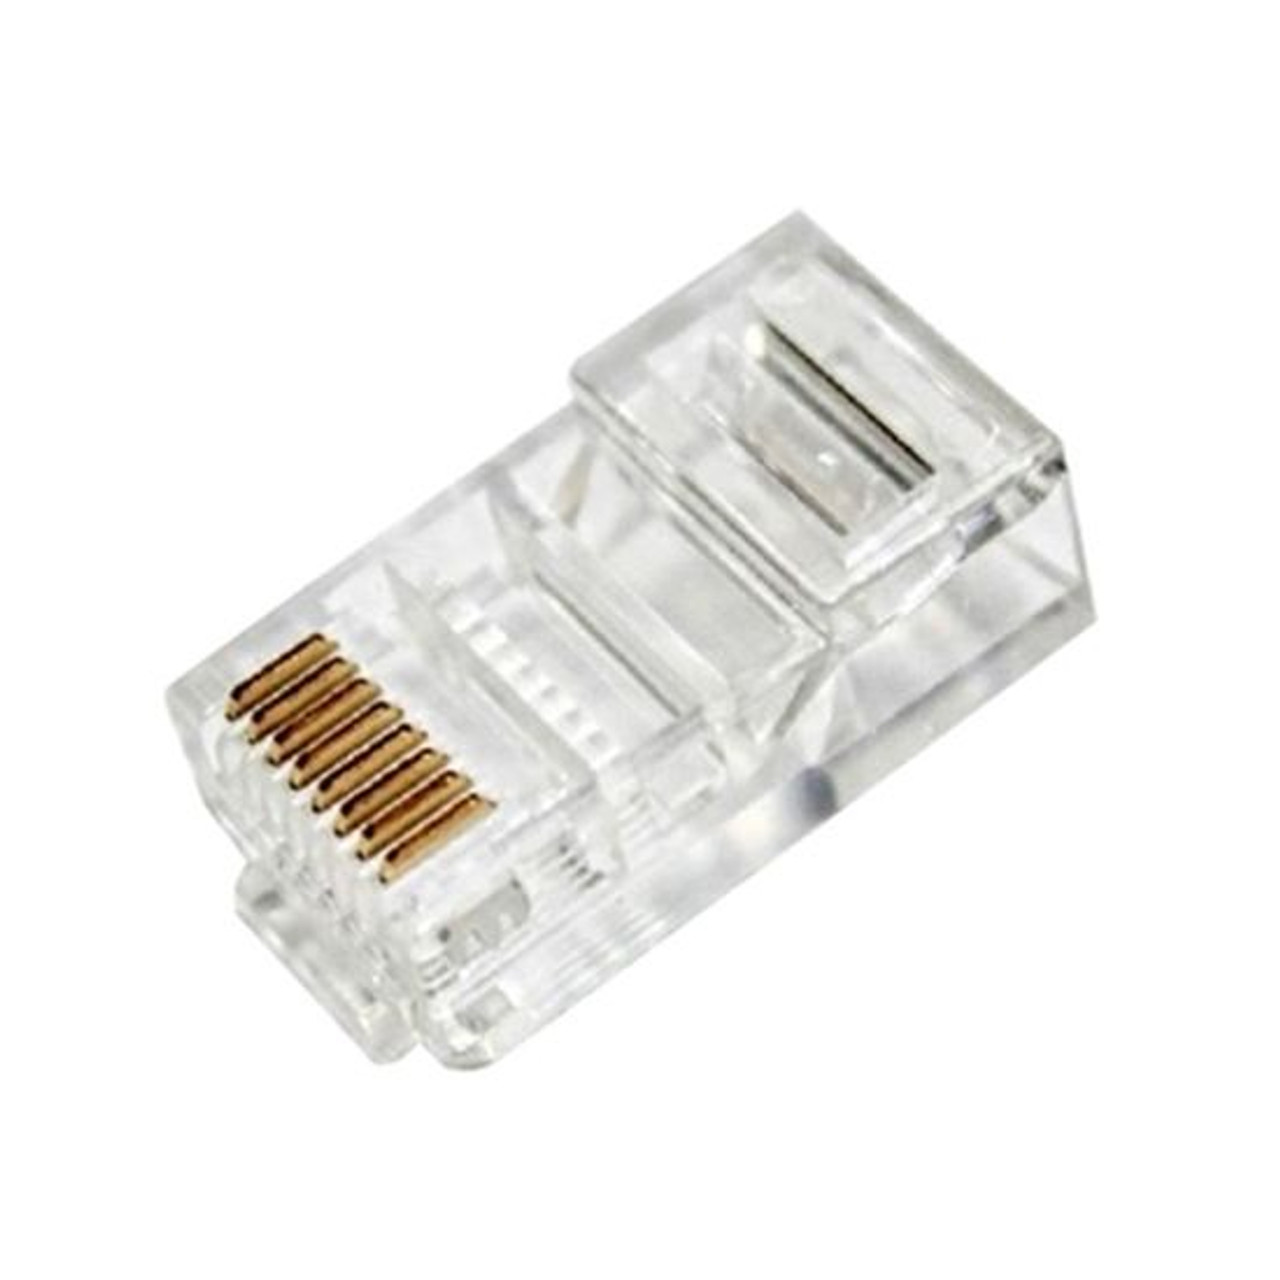 Eagle CAT5E Plug Connector RJ45 100 Pack Gold Round Solid Plate 8 Position 8 Conductor 8P8C 100 Pack Male Network 8 Pin Computer Ethernet Data Telephone Line RJ-45 Plugs for Cat 5e